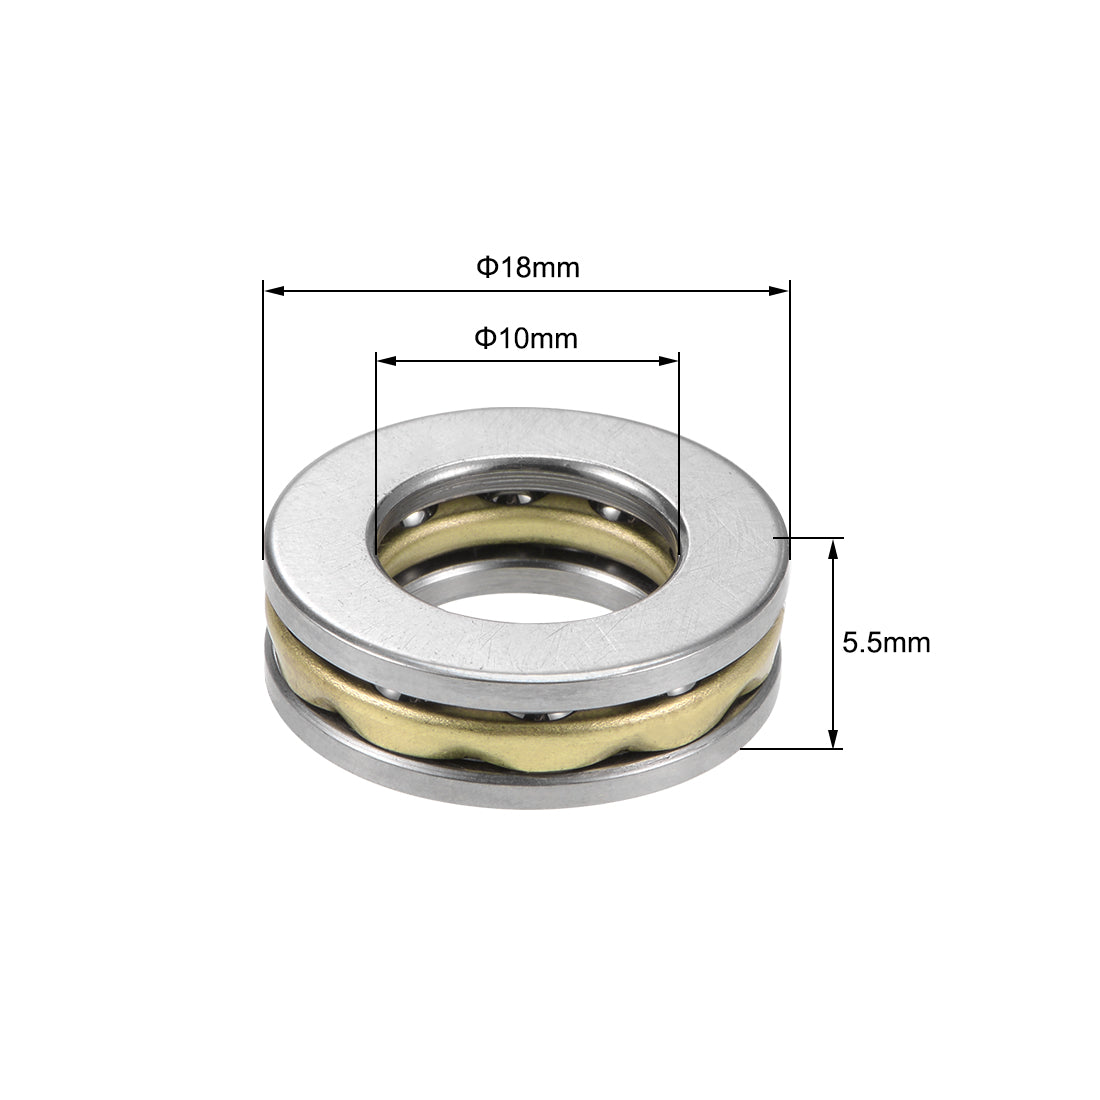 uxcell Uxcell F10-18M Miniature Thrust Ball Bearing 10x18x5.5mm Chrome Steel with Washer 10Pcs